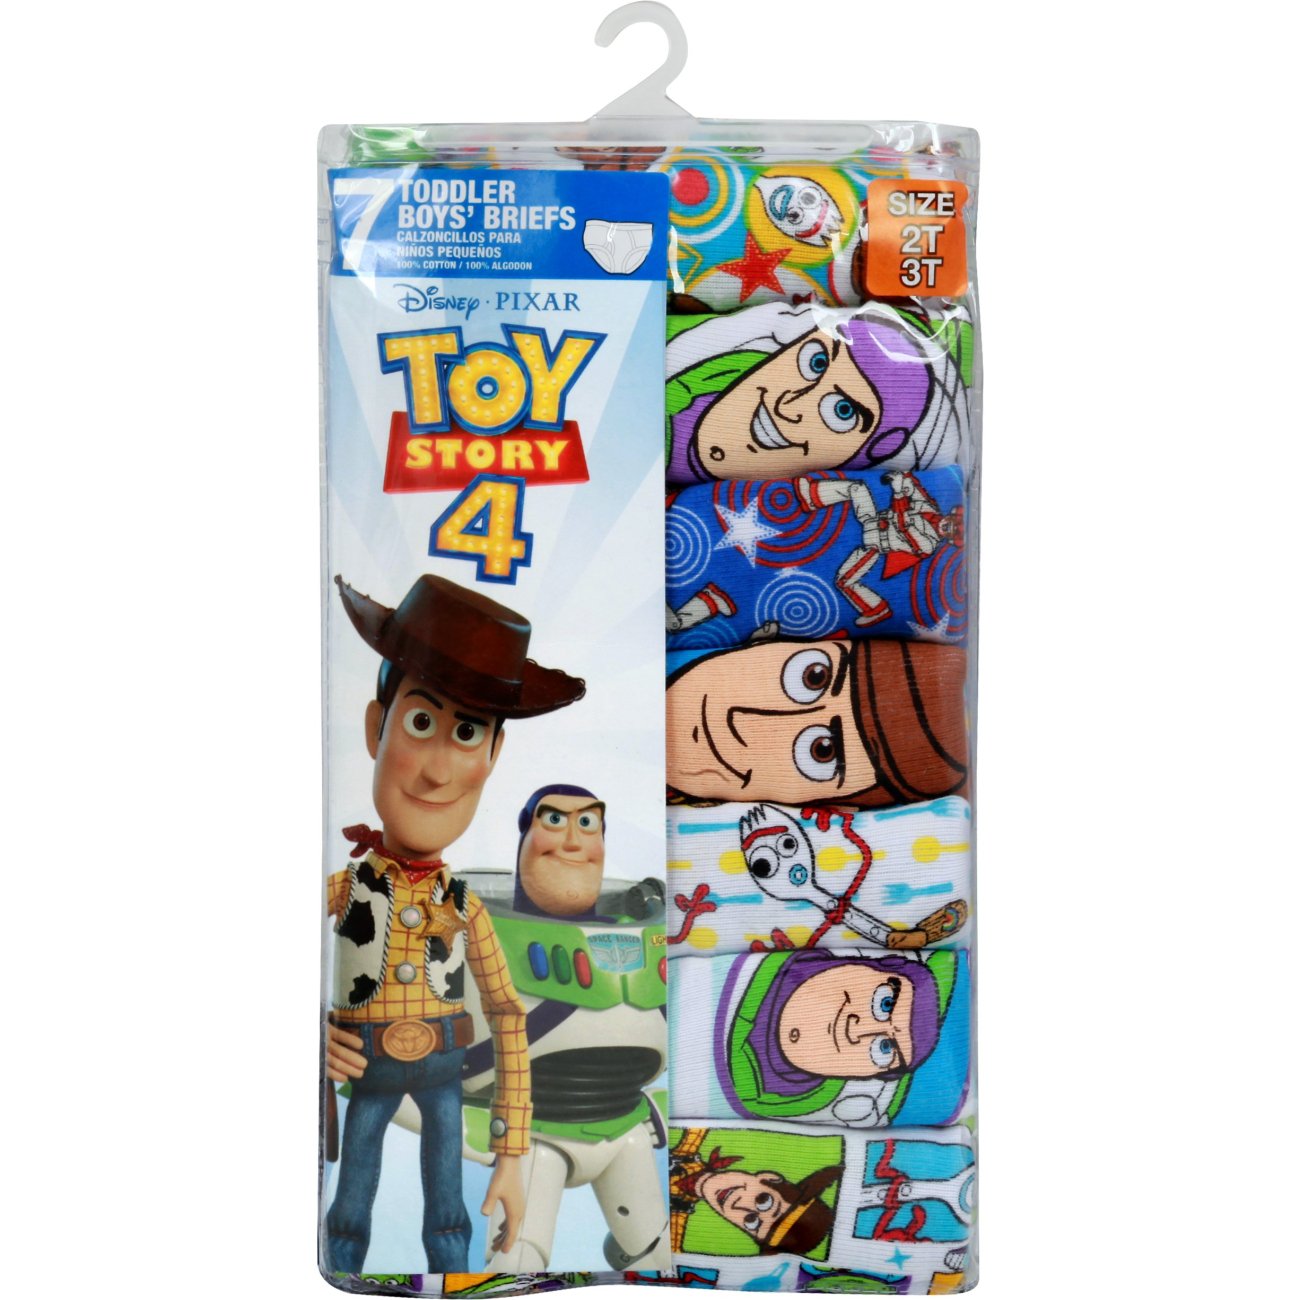 Disney Boys' Pixar Toy Story 100% Cotton Brief Multipacks with Woody, Buzz,  Rex, Forky and More in Sizes 2/3t, 4t, 4, 6 & 8